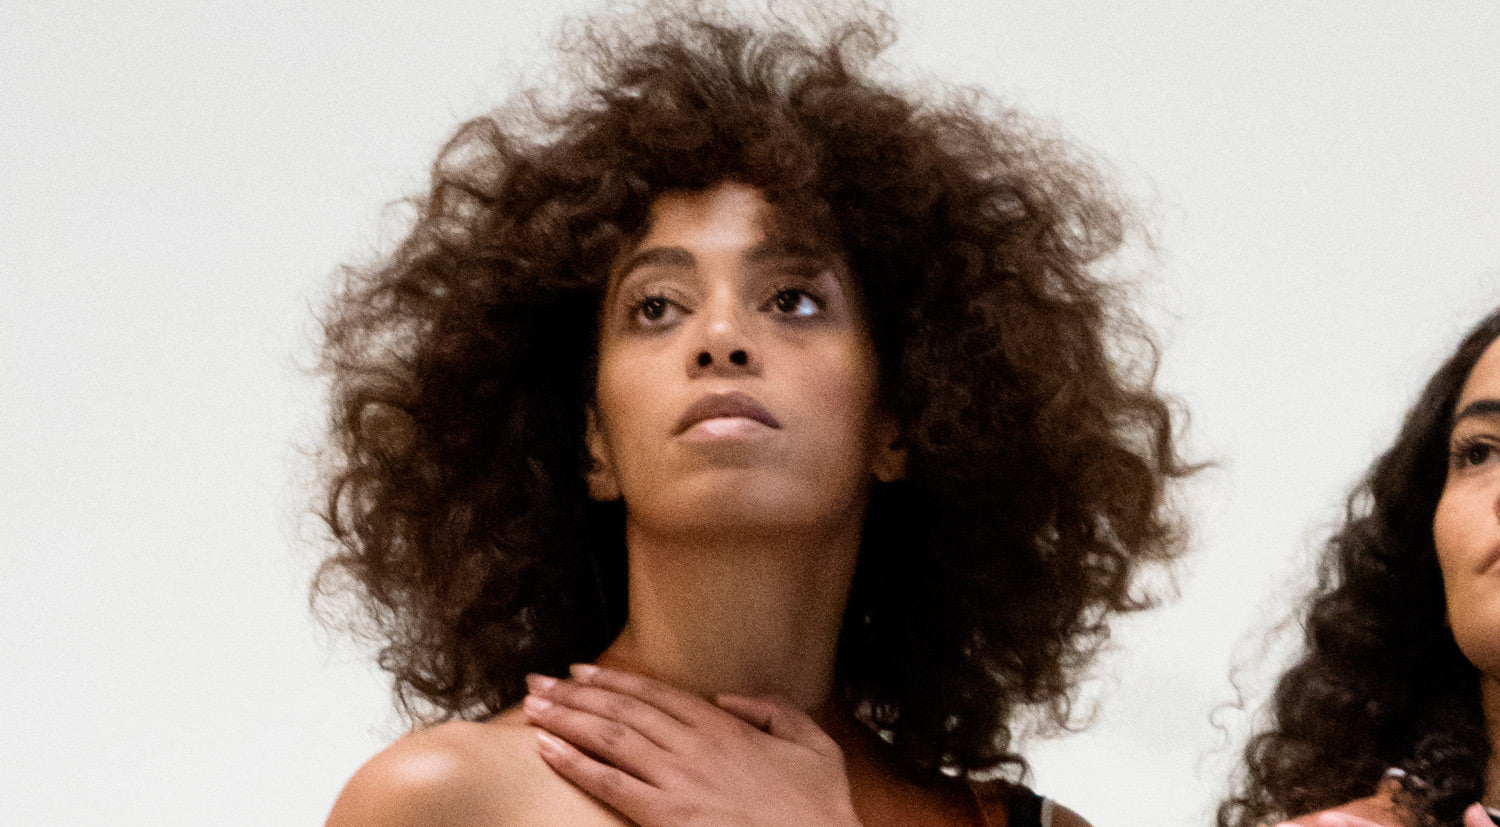 Review, Makeup Trend 2017, 2018: Solange Knowles Private Concert at The Guggenheim, Urban Decay Quick Fix Hydra-Charged Complexion Prep Priming Spray, Rehab Makeup Prep Hot Springs Hydrating Gel, NAKED Skin One & Done Foundation, Perversion Mascara